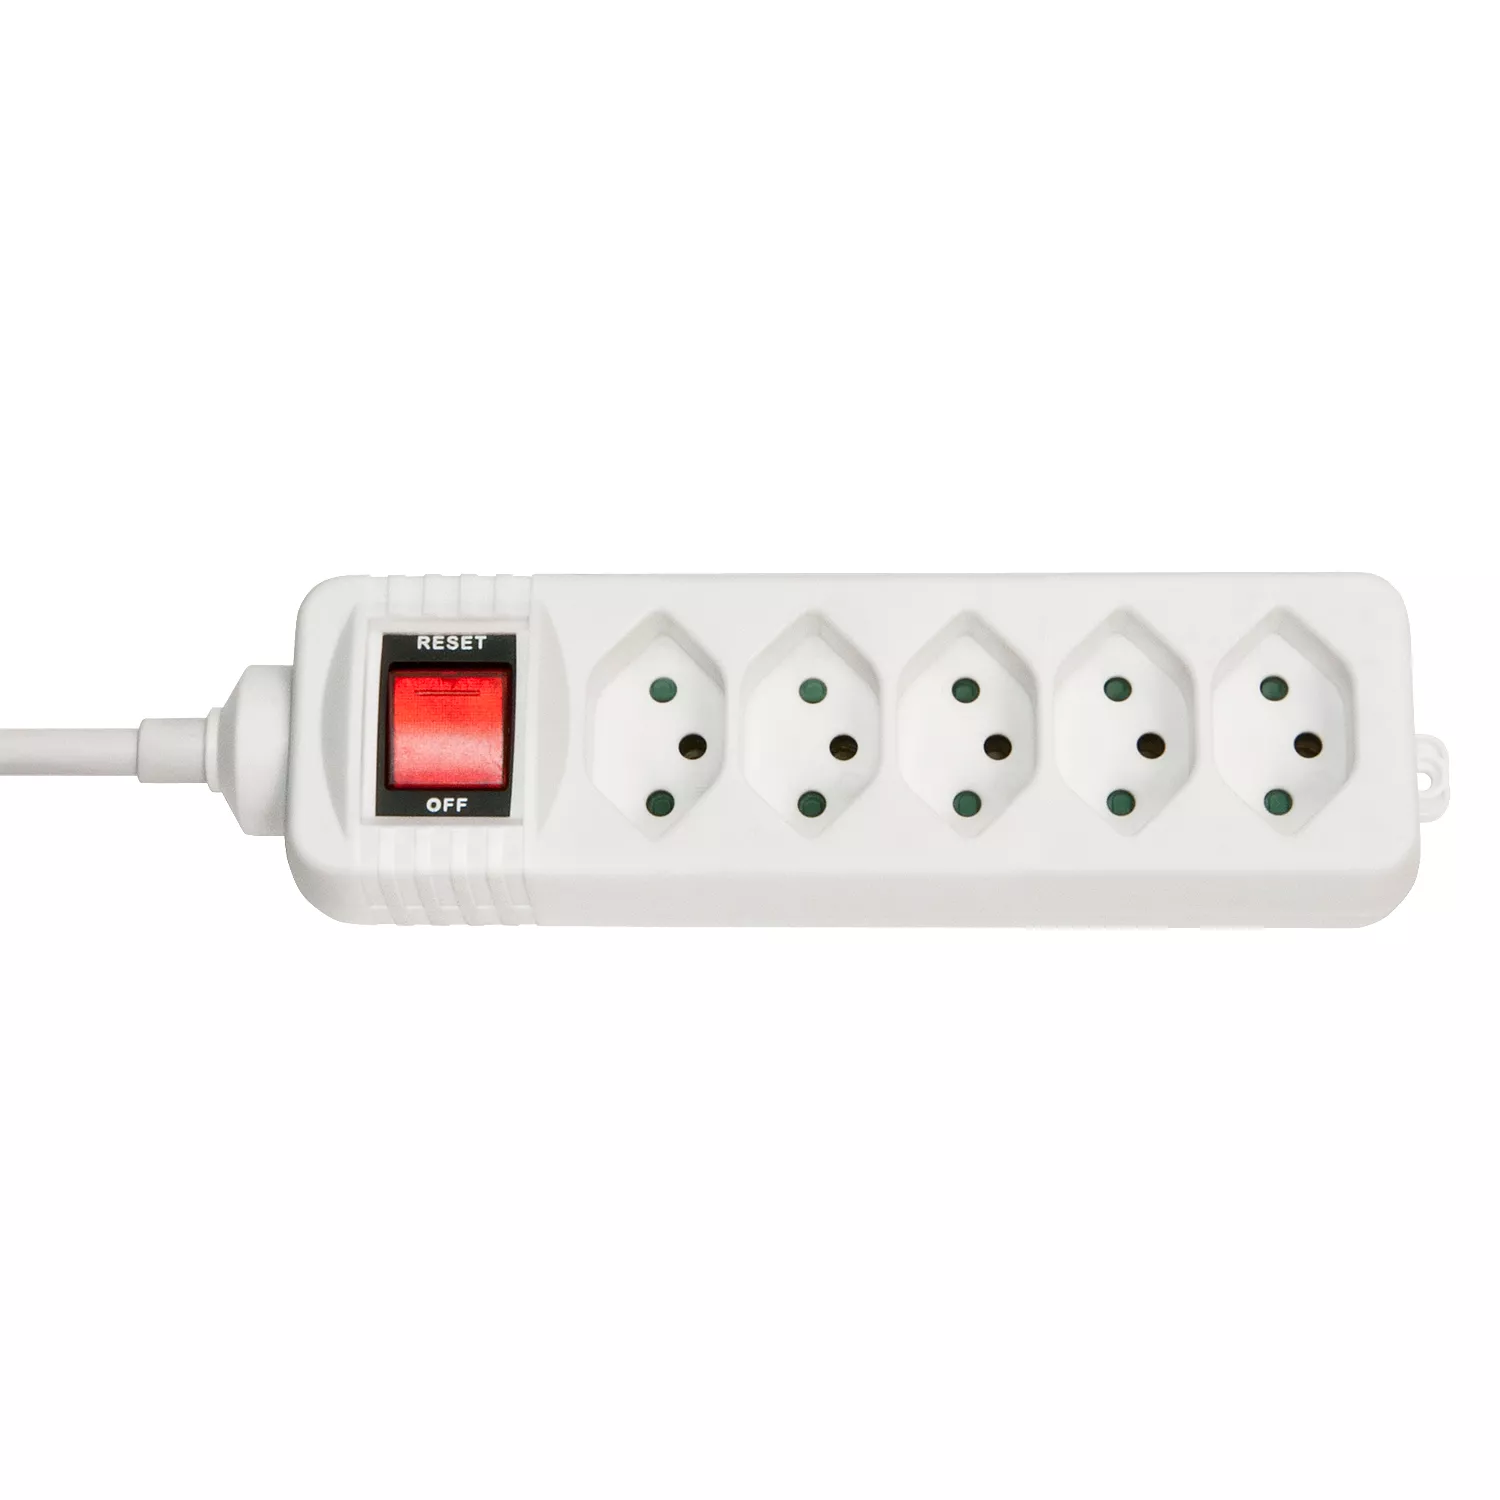 Achat Câble divers LINDY Mains 5 way gang socket Swiss with on/off Switch sur hello RSE